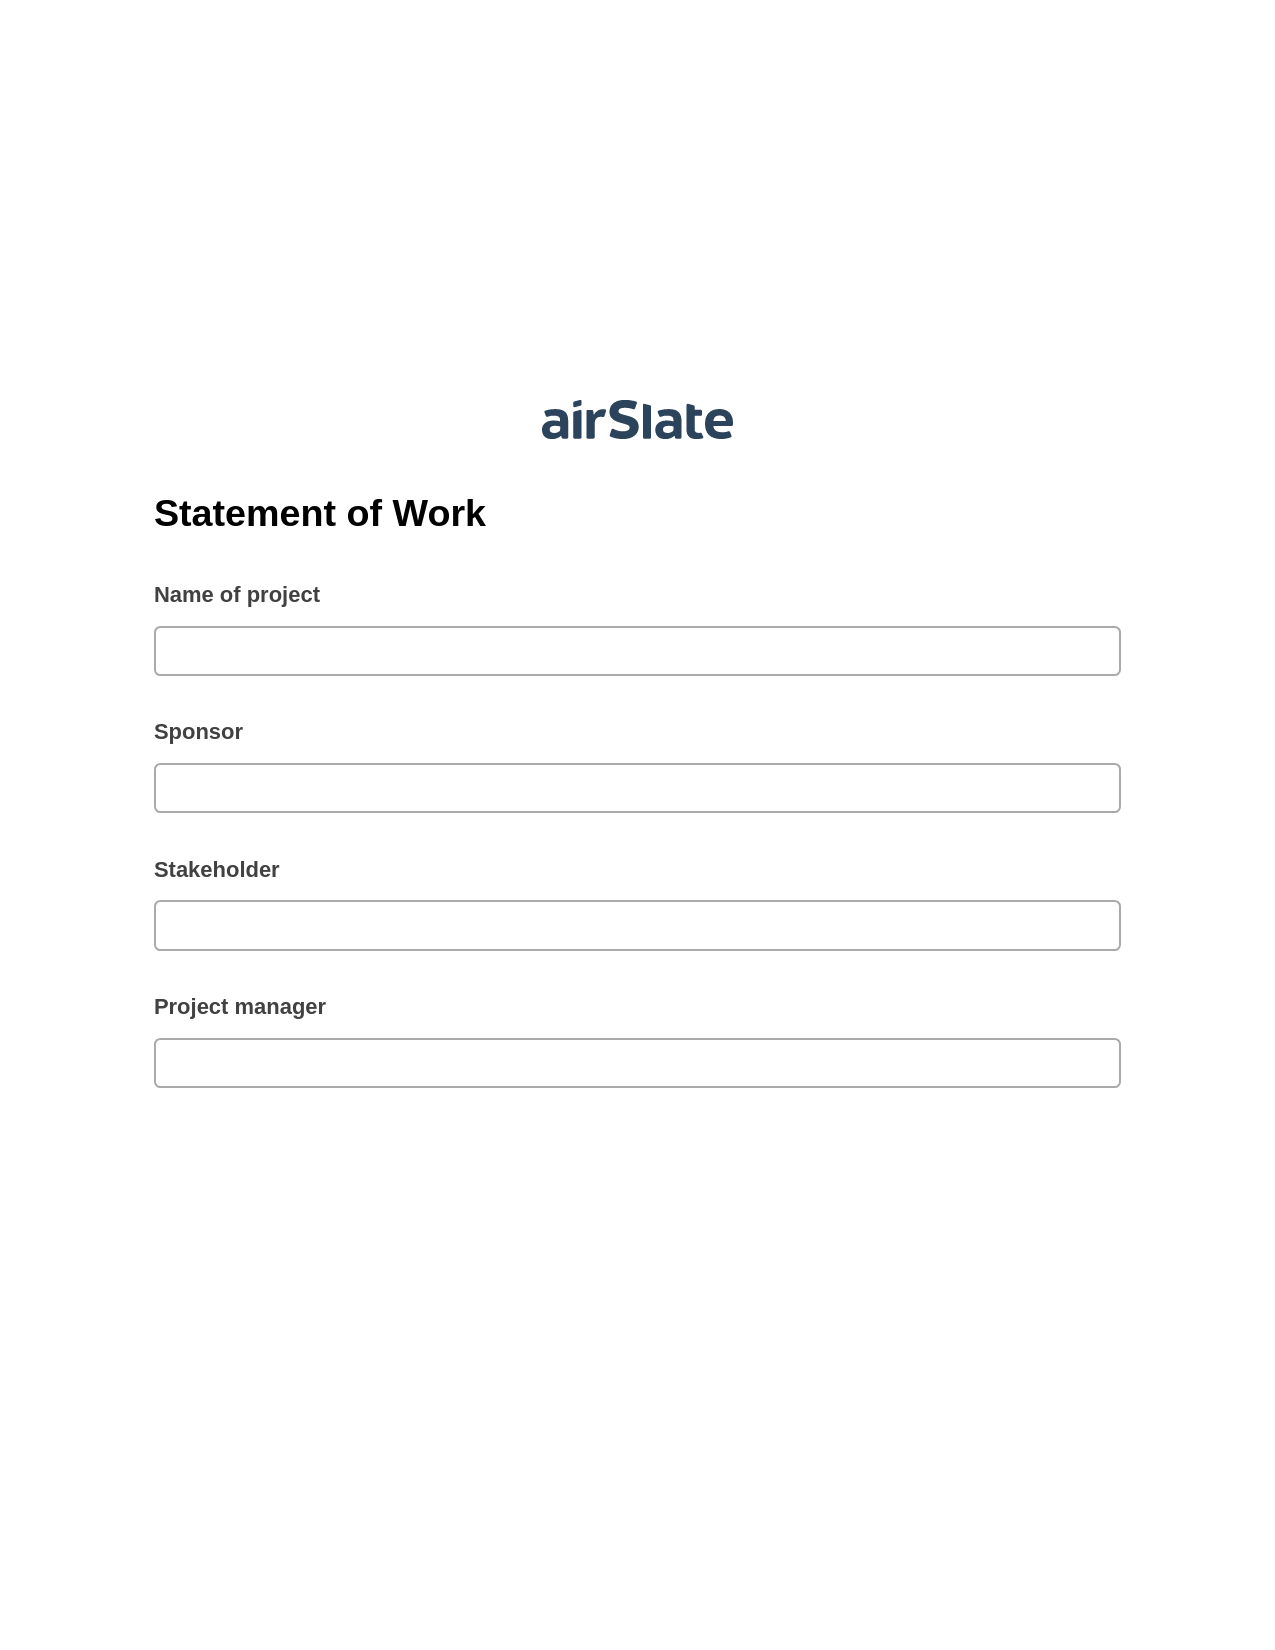 Statement of Work Pre-fill Dropdown from Airtable, Invoke Salesforce Process Bot, Export to Salesforce Bot